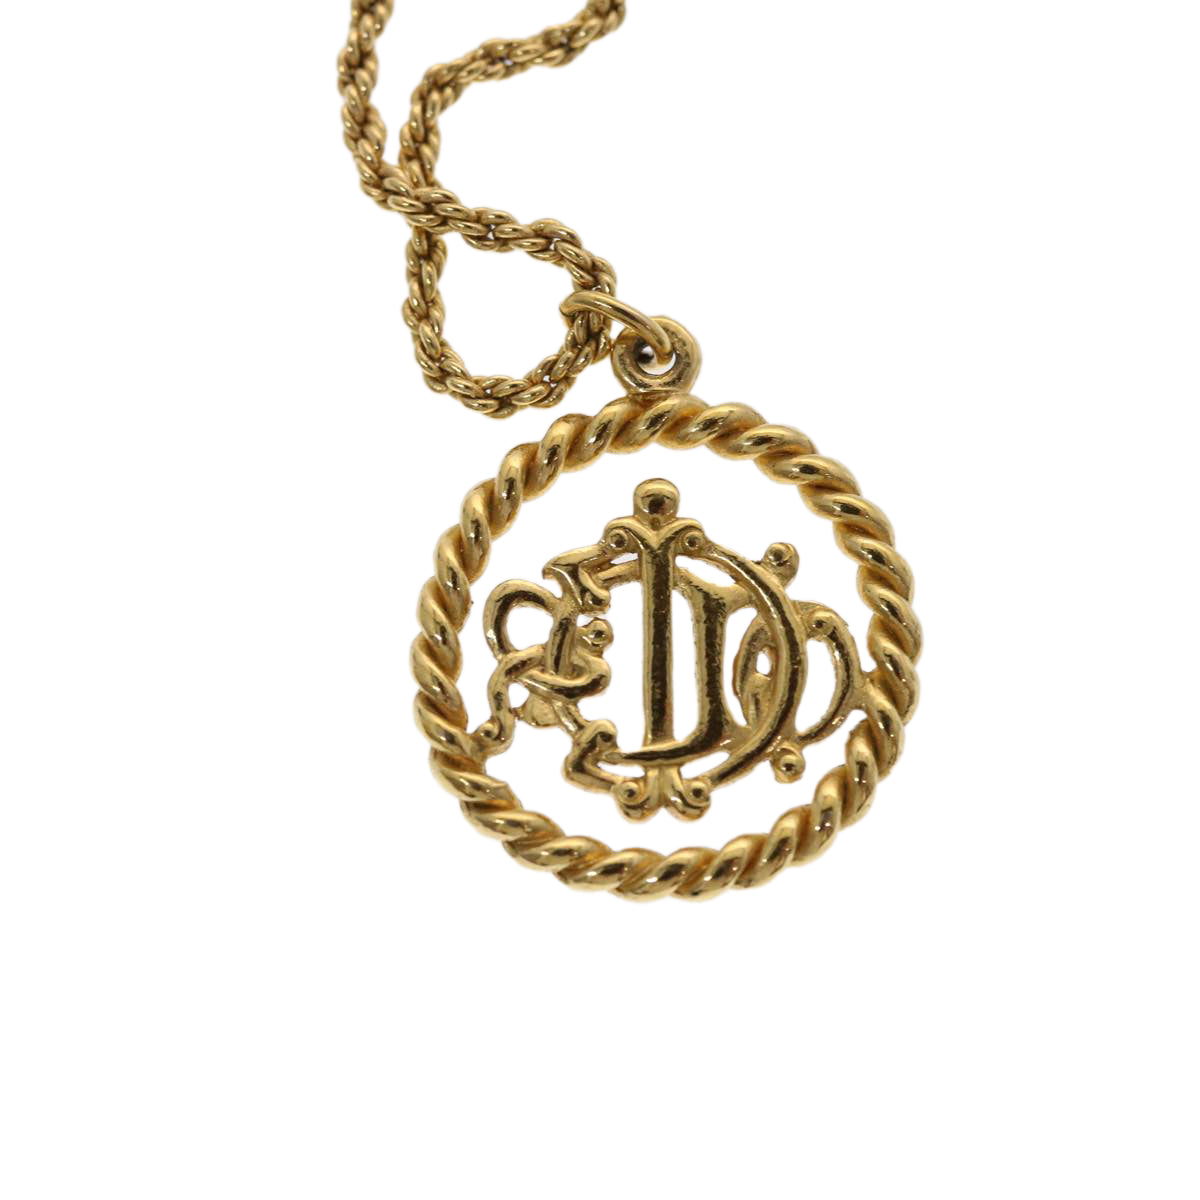 Christian Dior Necklace Metal Gold Tone Auth am4660